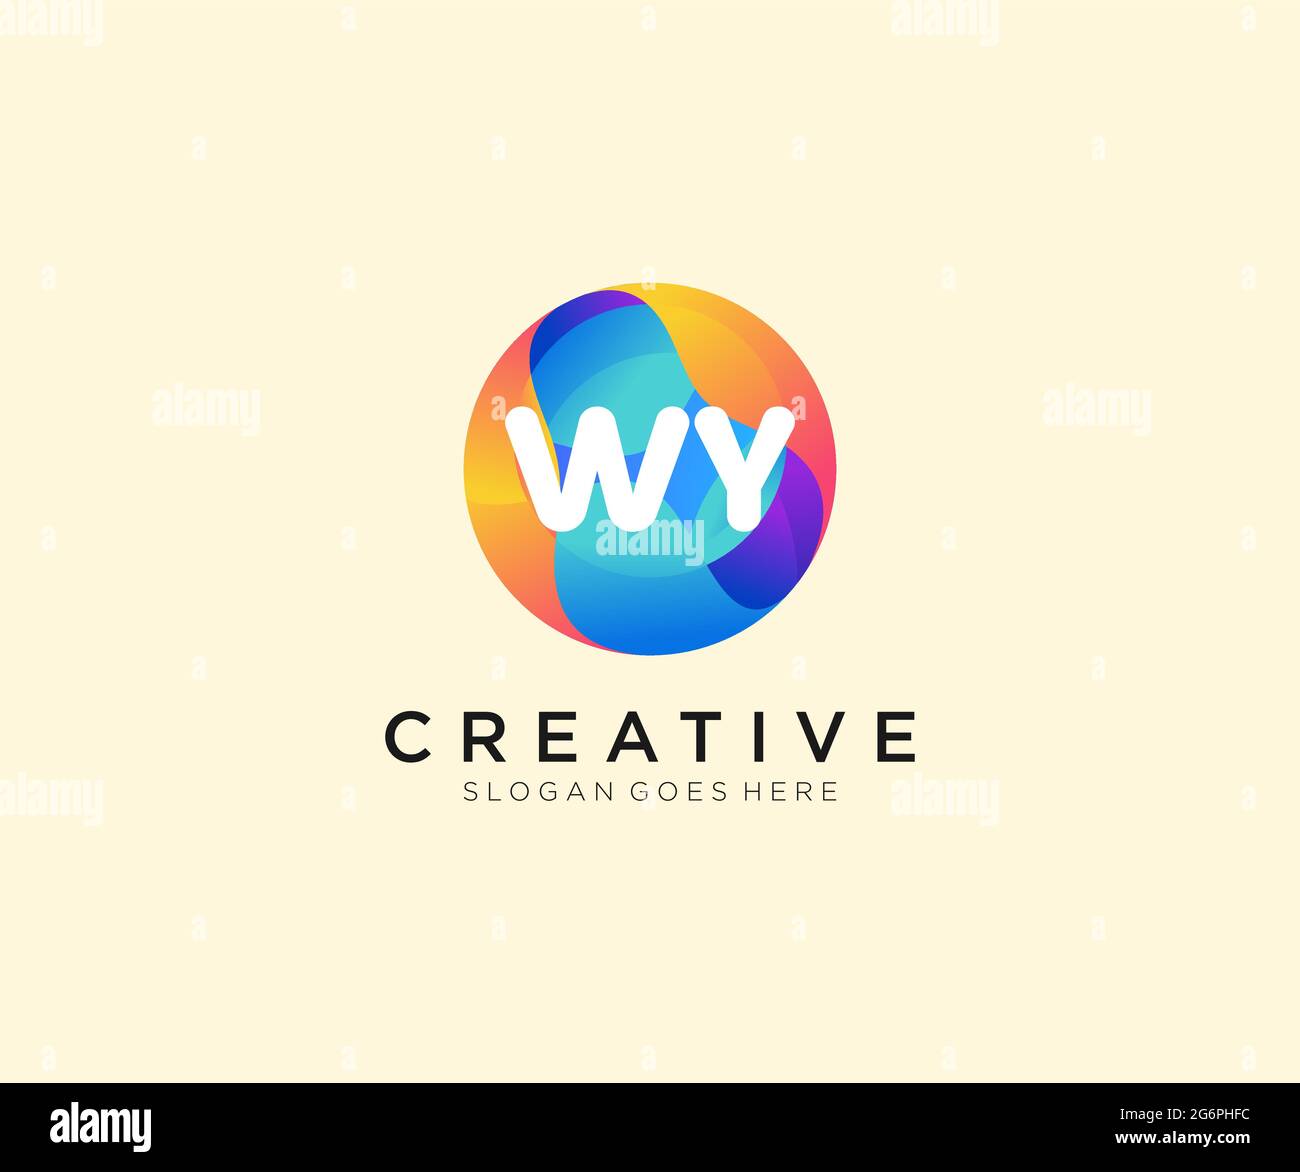 WY initial logo With Colorful Circle template Stock Vector